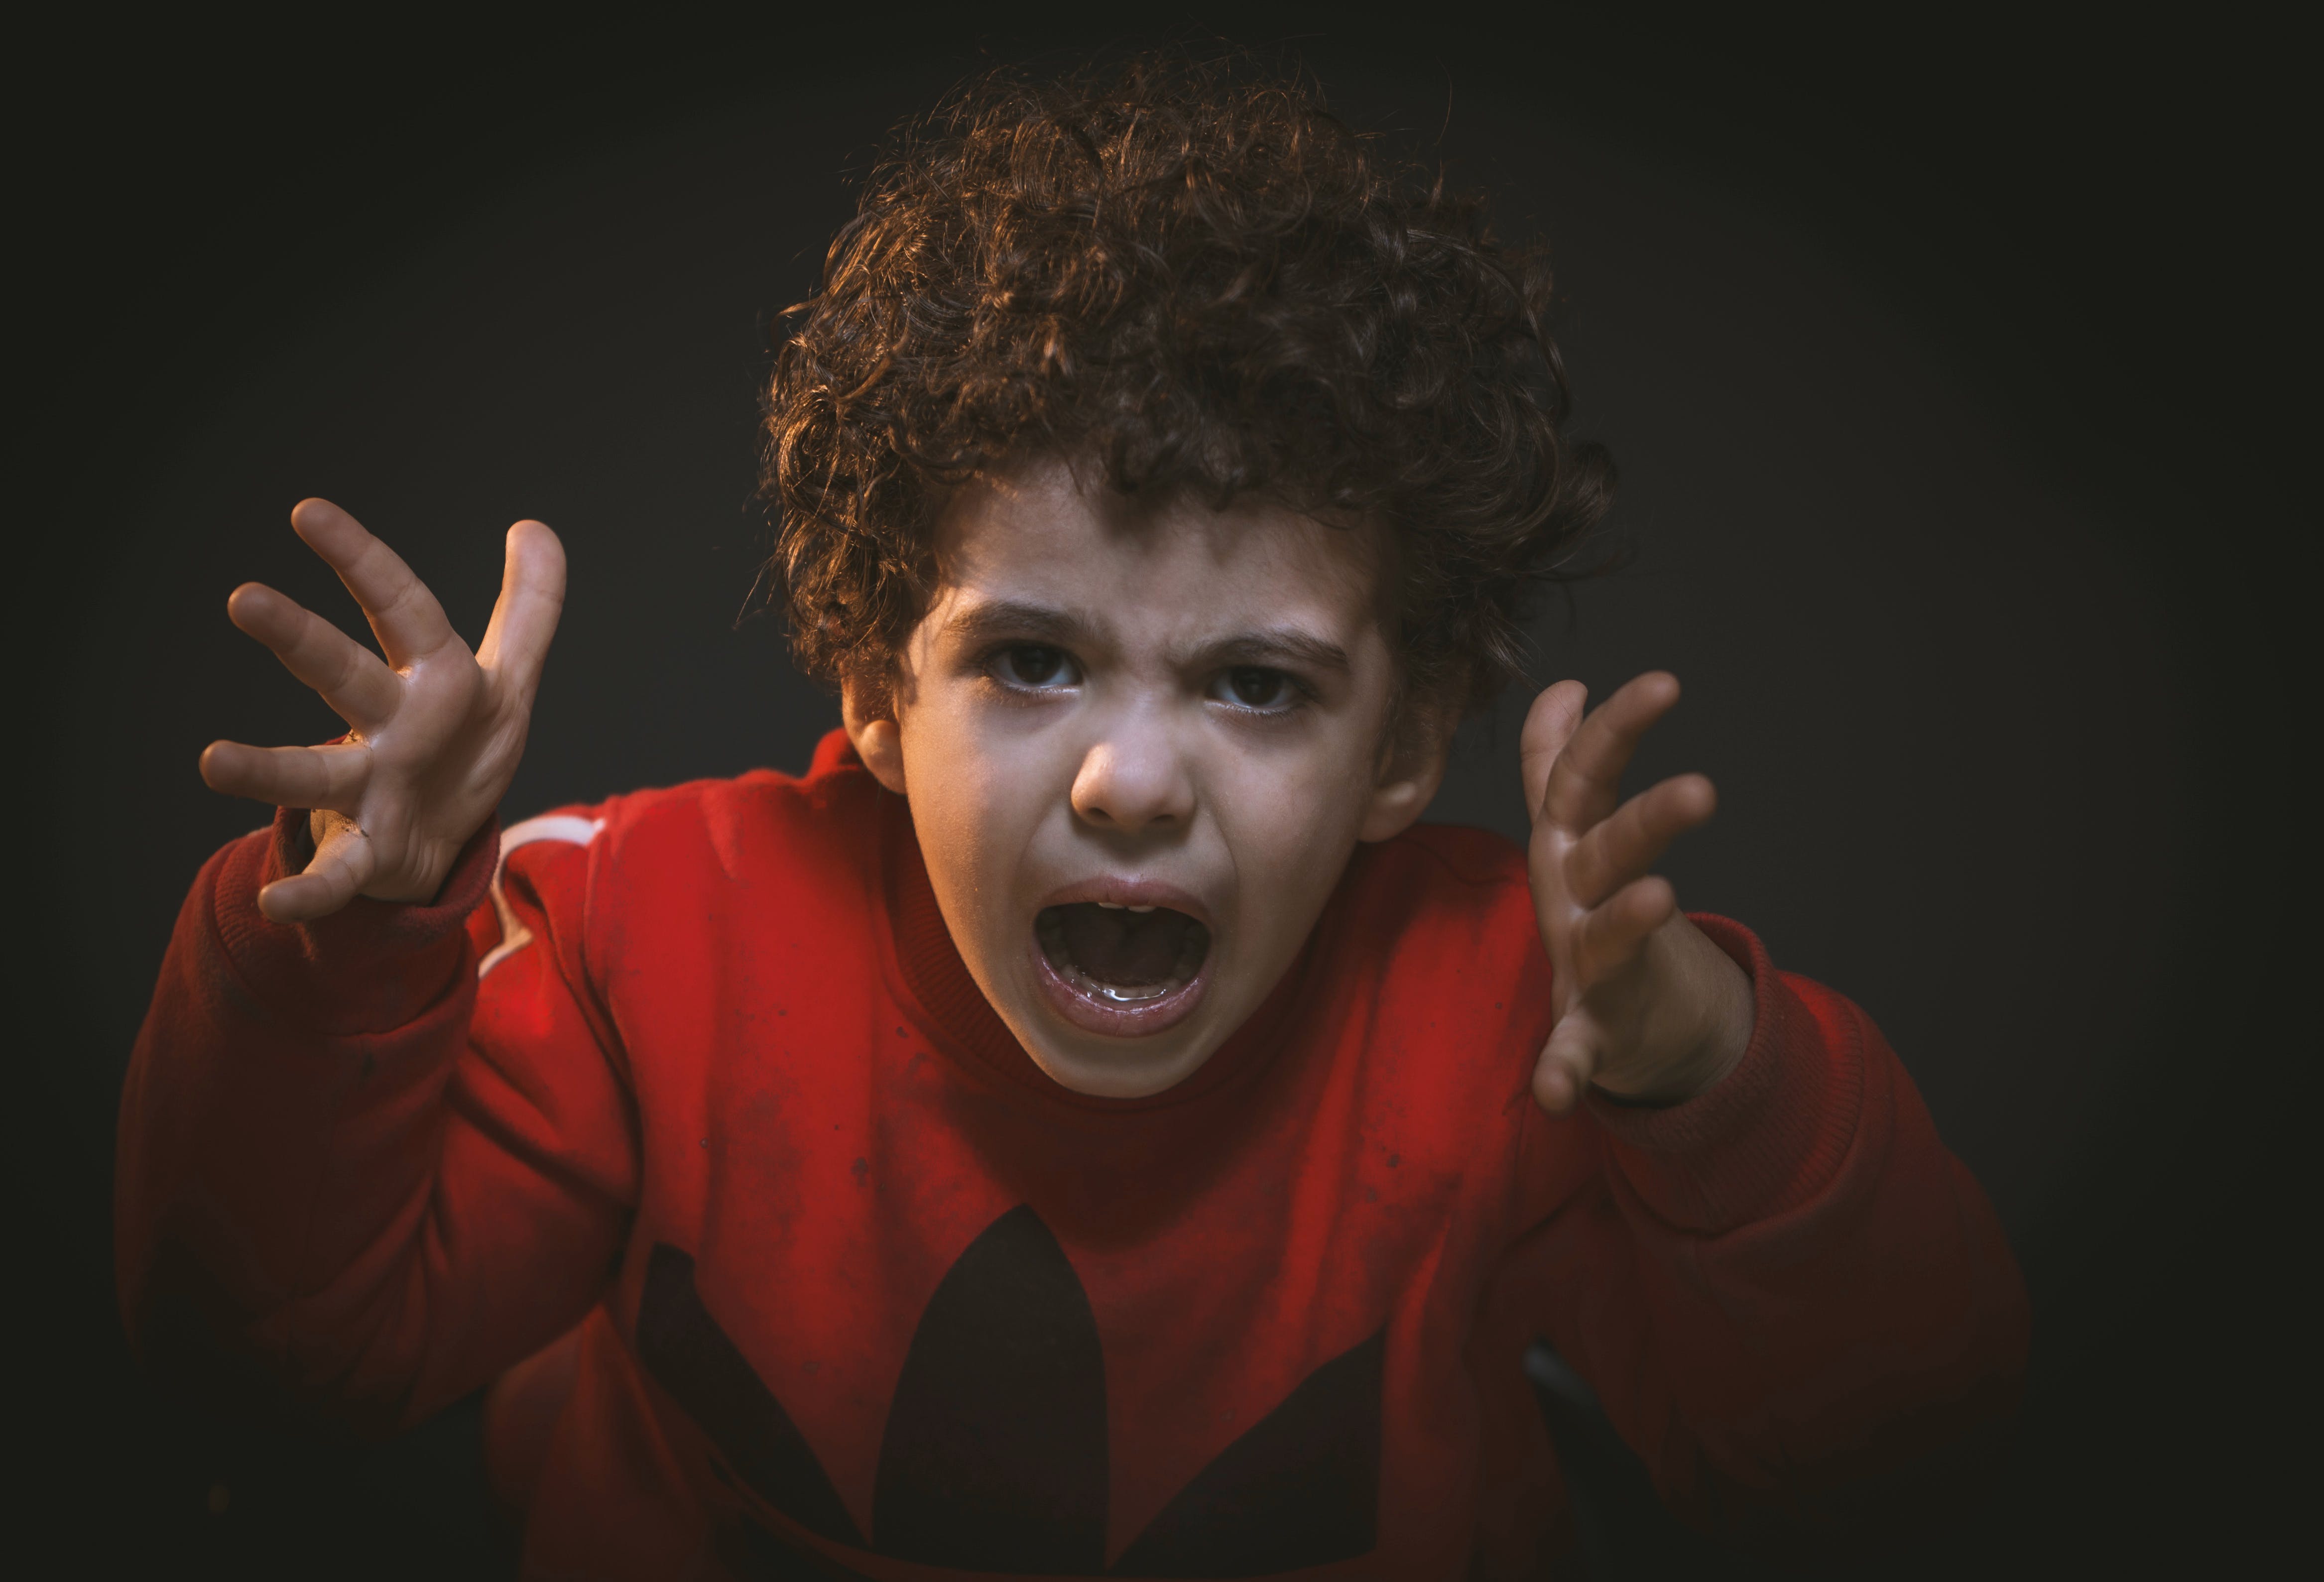 A little boy screaming while gesturing with his hands | Source: Pexels